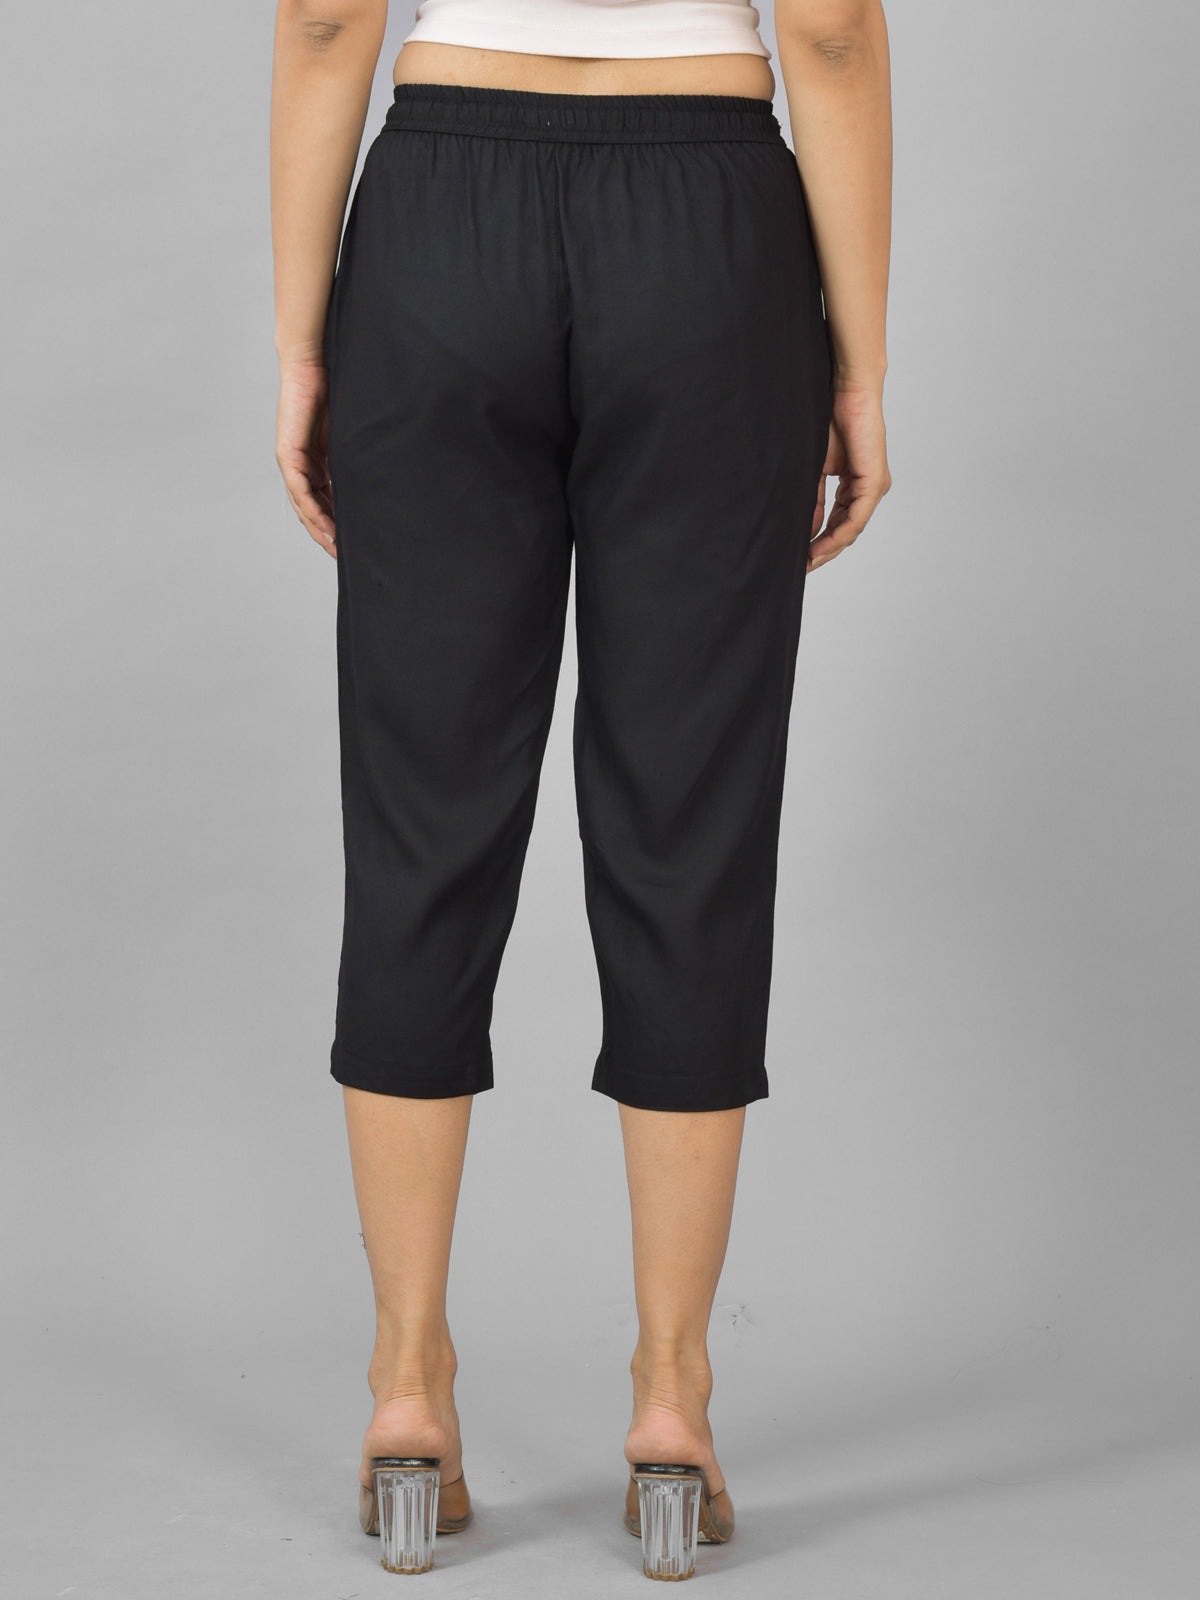 Pack Of 2 Womens Black And Gajri Calf Length Rayon Culottes Trouser Combo